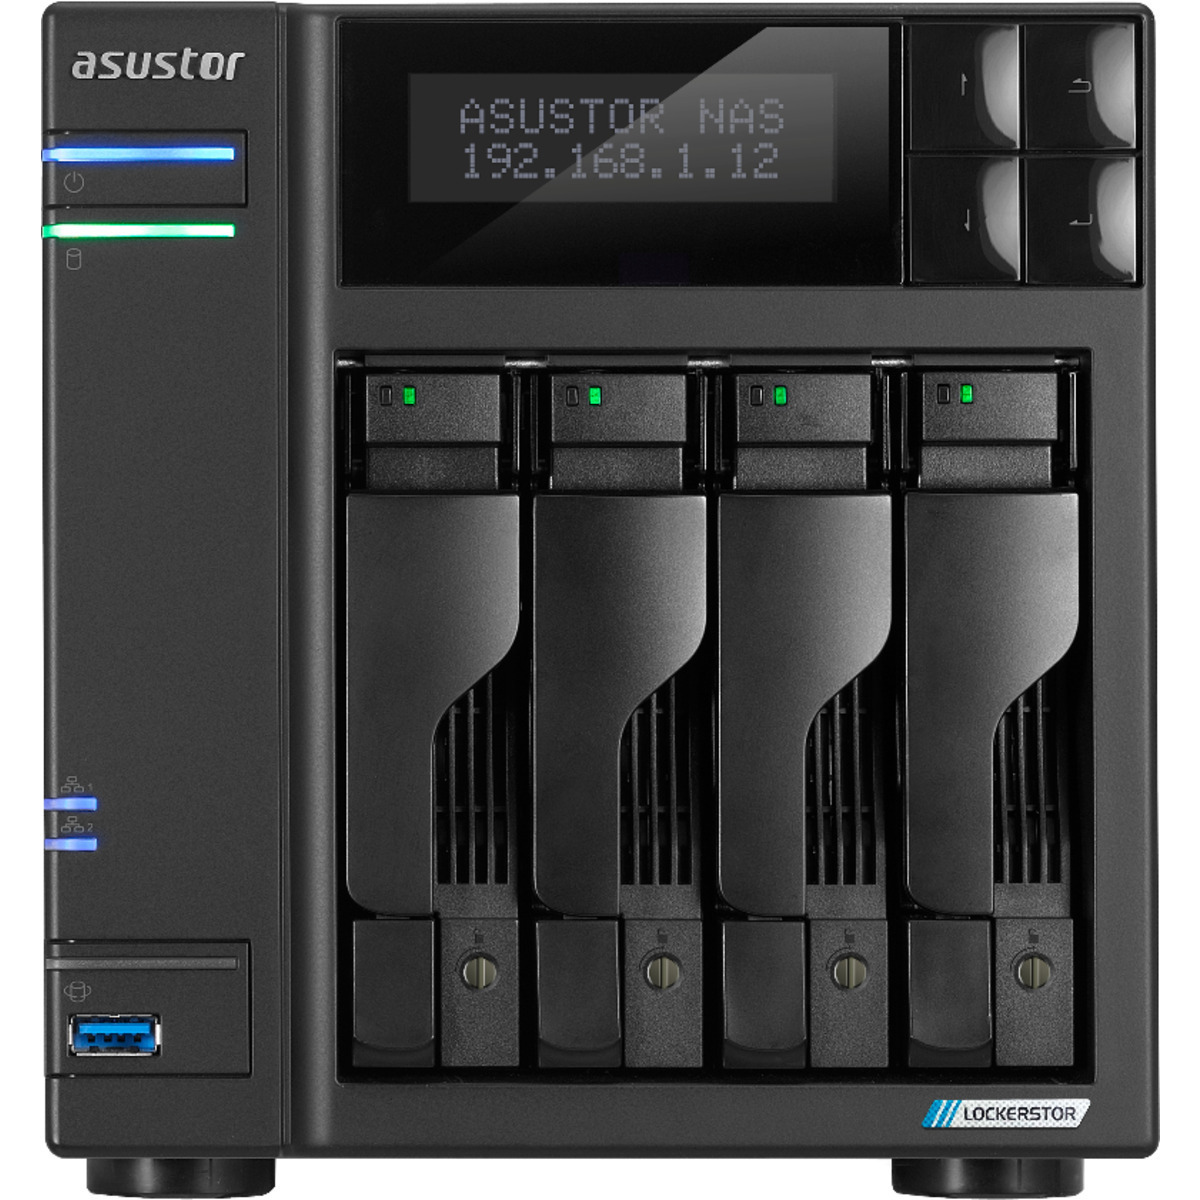 ASUSTOR LOCKERSTOR 4 Gen2 AS6704T 72tb 4-Bay Desktop Multimedia / Power User / Business NAS - Network Attached Storage Device 3x24tb Seagate IronWolf Pro ST24000NT002 3.5 7200rpm SATA 6Gb/s HDD NAS Class Drives Installed - Burn-In Tested - FREE RAM UPGRADE LOCKERSTOR 4 Gen2 AS6704T